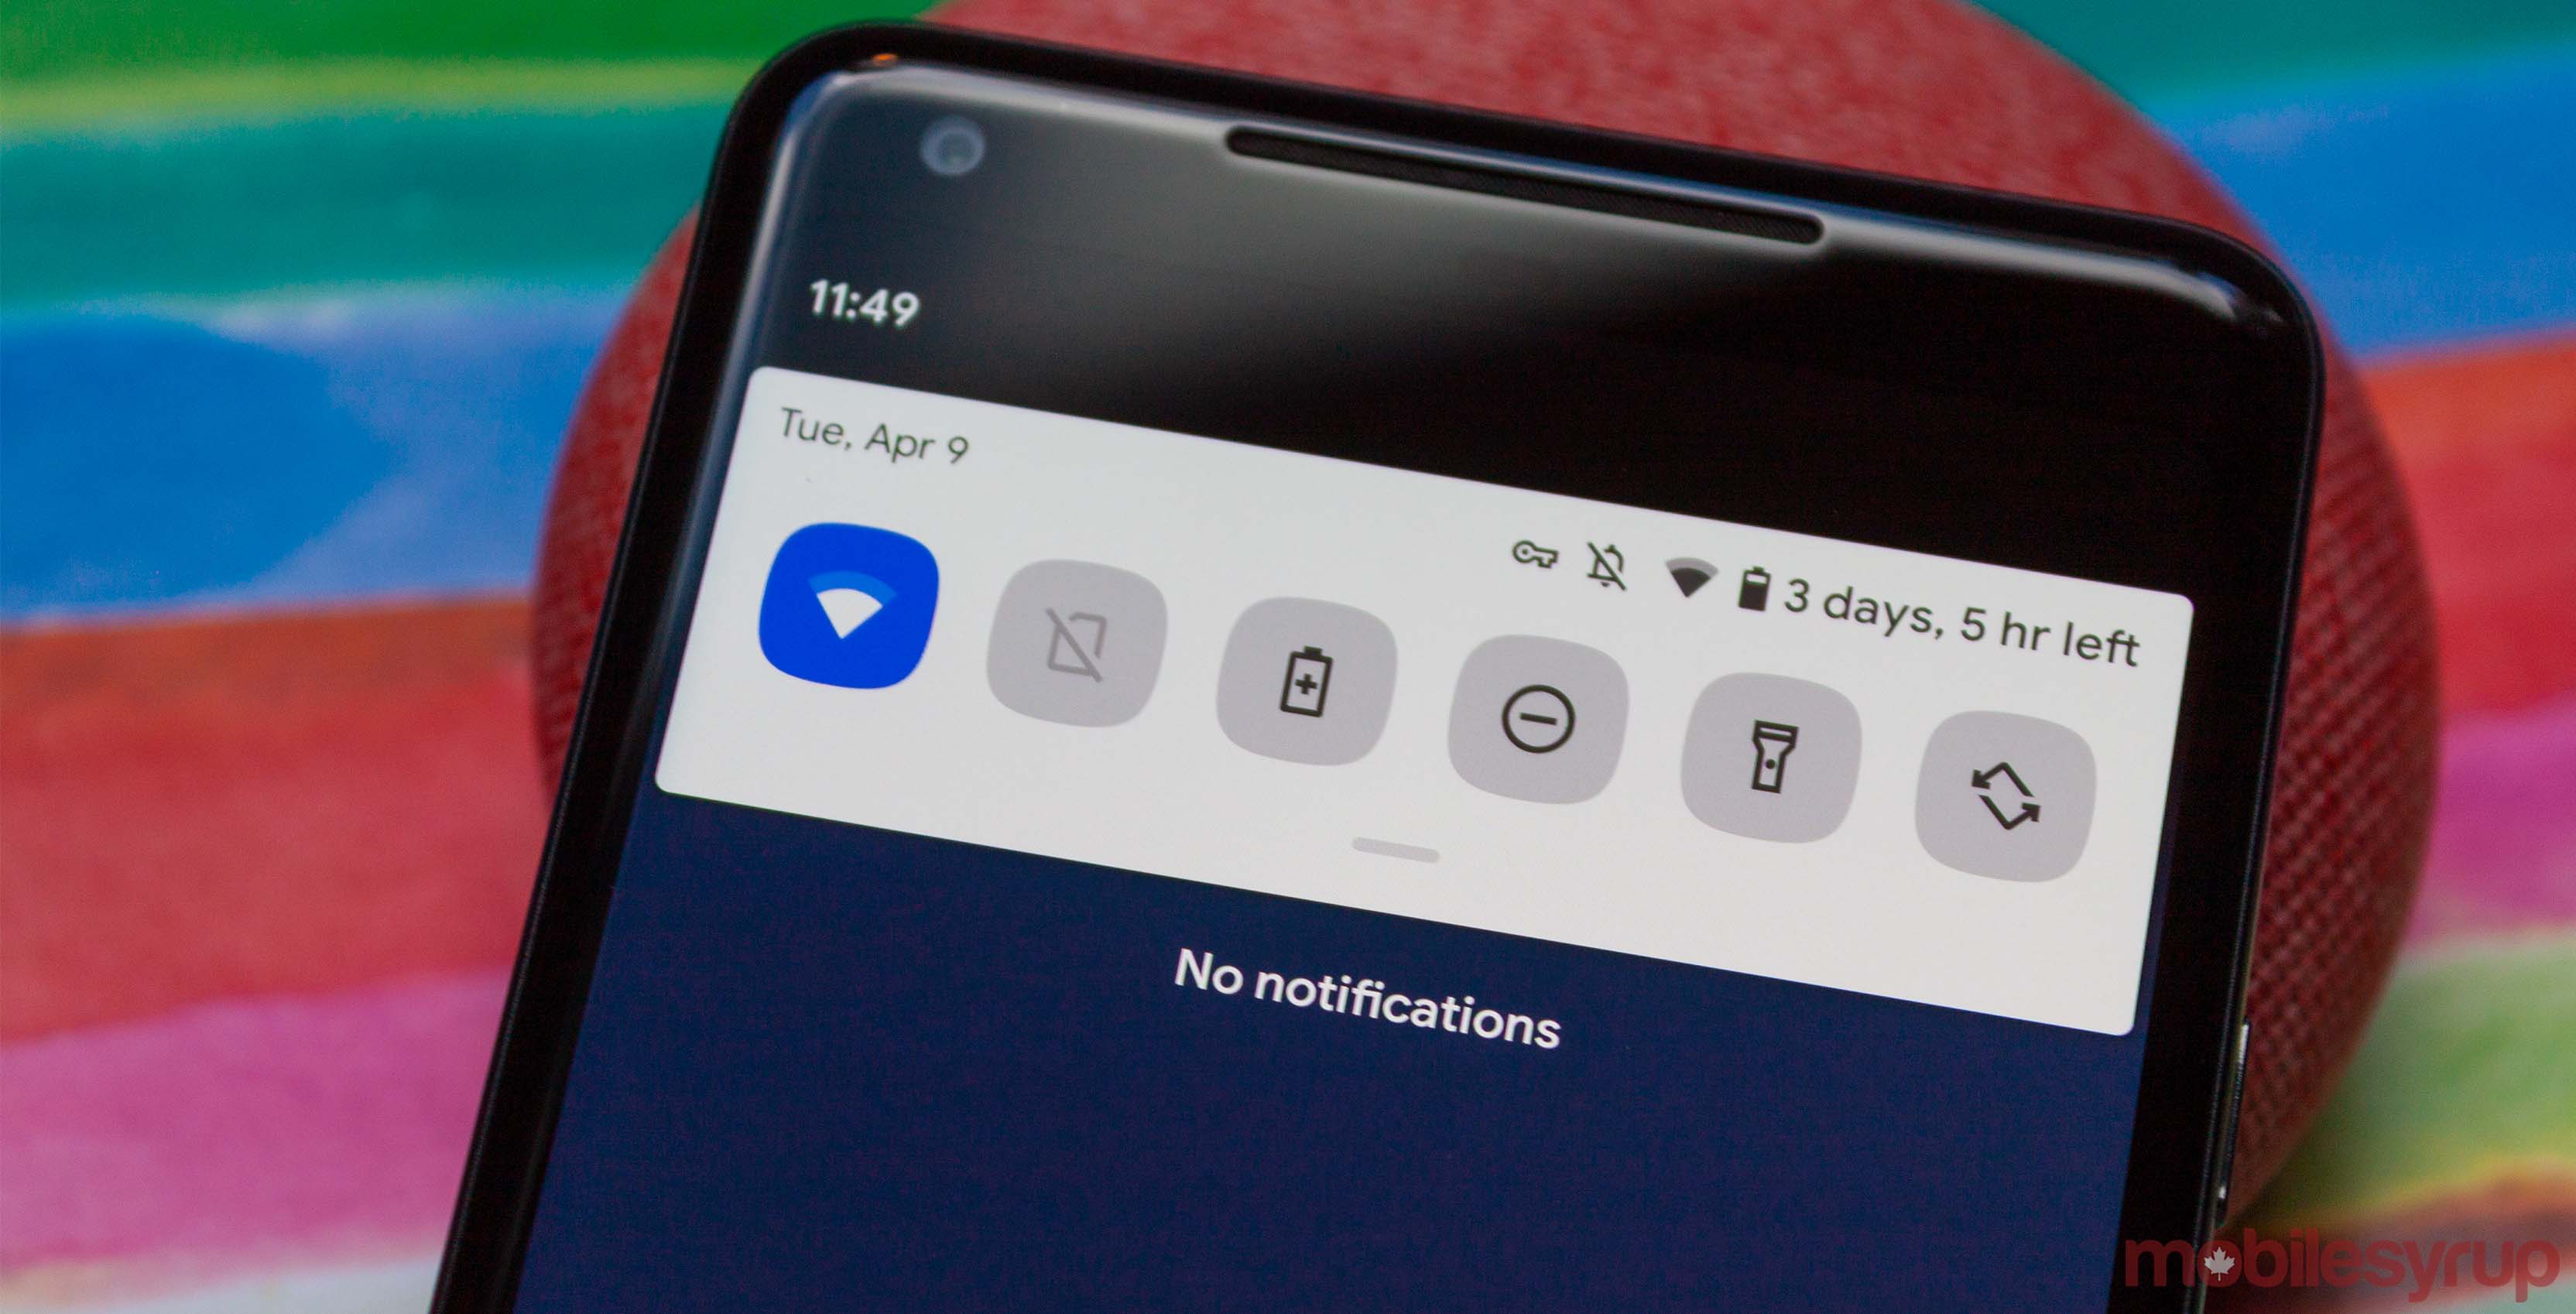 Adjusting the app icon shape in Android Q also changes quick settings